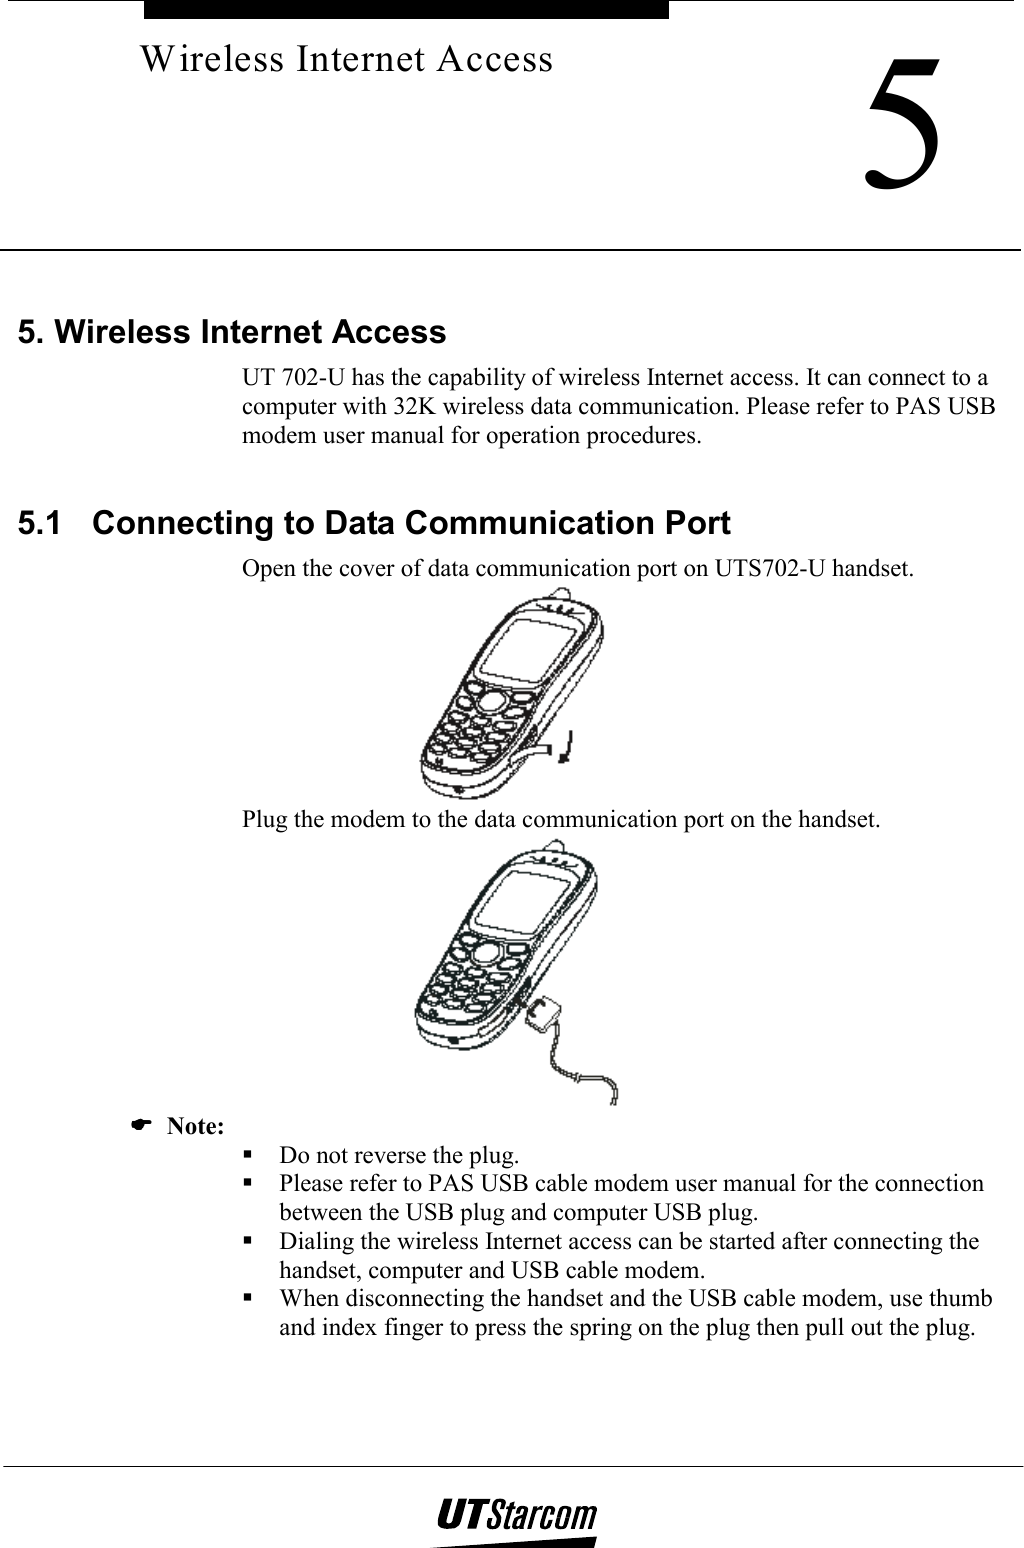     5Wireless Internet Access 5. Wireless Internet Access UT 702-U has the capability of wireless Internet access. It can connect to a computer with 32K wireless data communication. Please refer to PAS USB modem user manual for operation procedures.  5.1  Connecting to Data Communication Port Open the cover of data communication port on UTS702-U handset.  Plug the modem to the data communication port on the handset.  (((( Note:  Do not reverse the plug.  Please refer to PAS USB cable modem user manual for the connection between the USB plug and computer USB plug.  Dialing the wireless Internet access can be started after connecting the handset, computer and USB cable modem.  When disconnecting the handset and the USB cable modem, use thumb and index finger to press the spring on the plug then pull out the plug. 